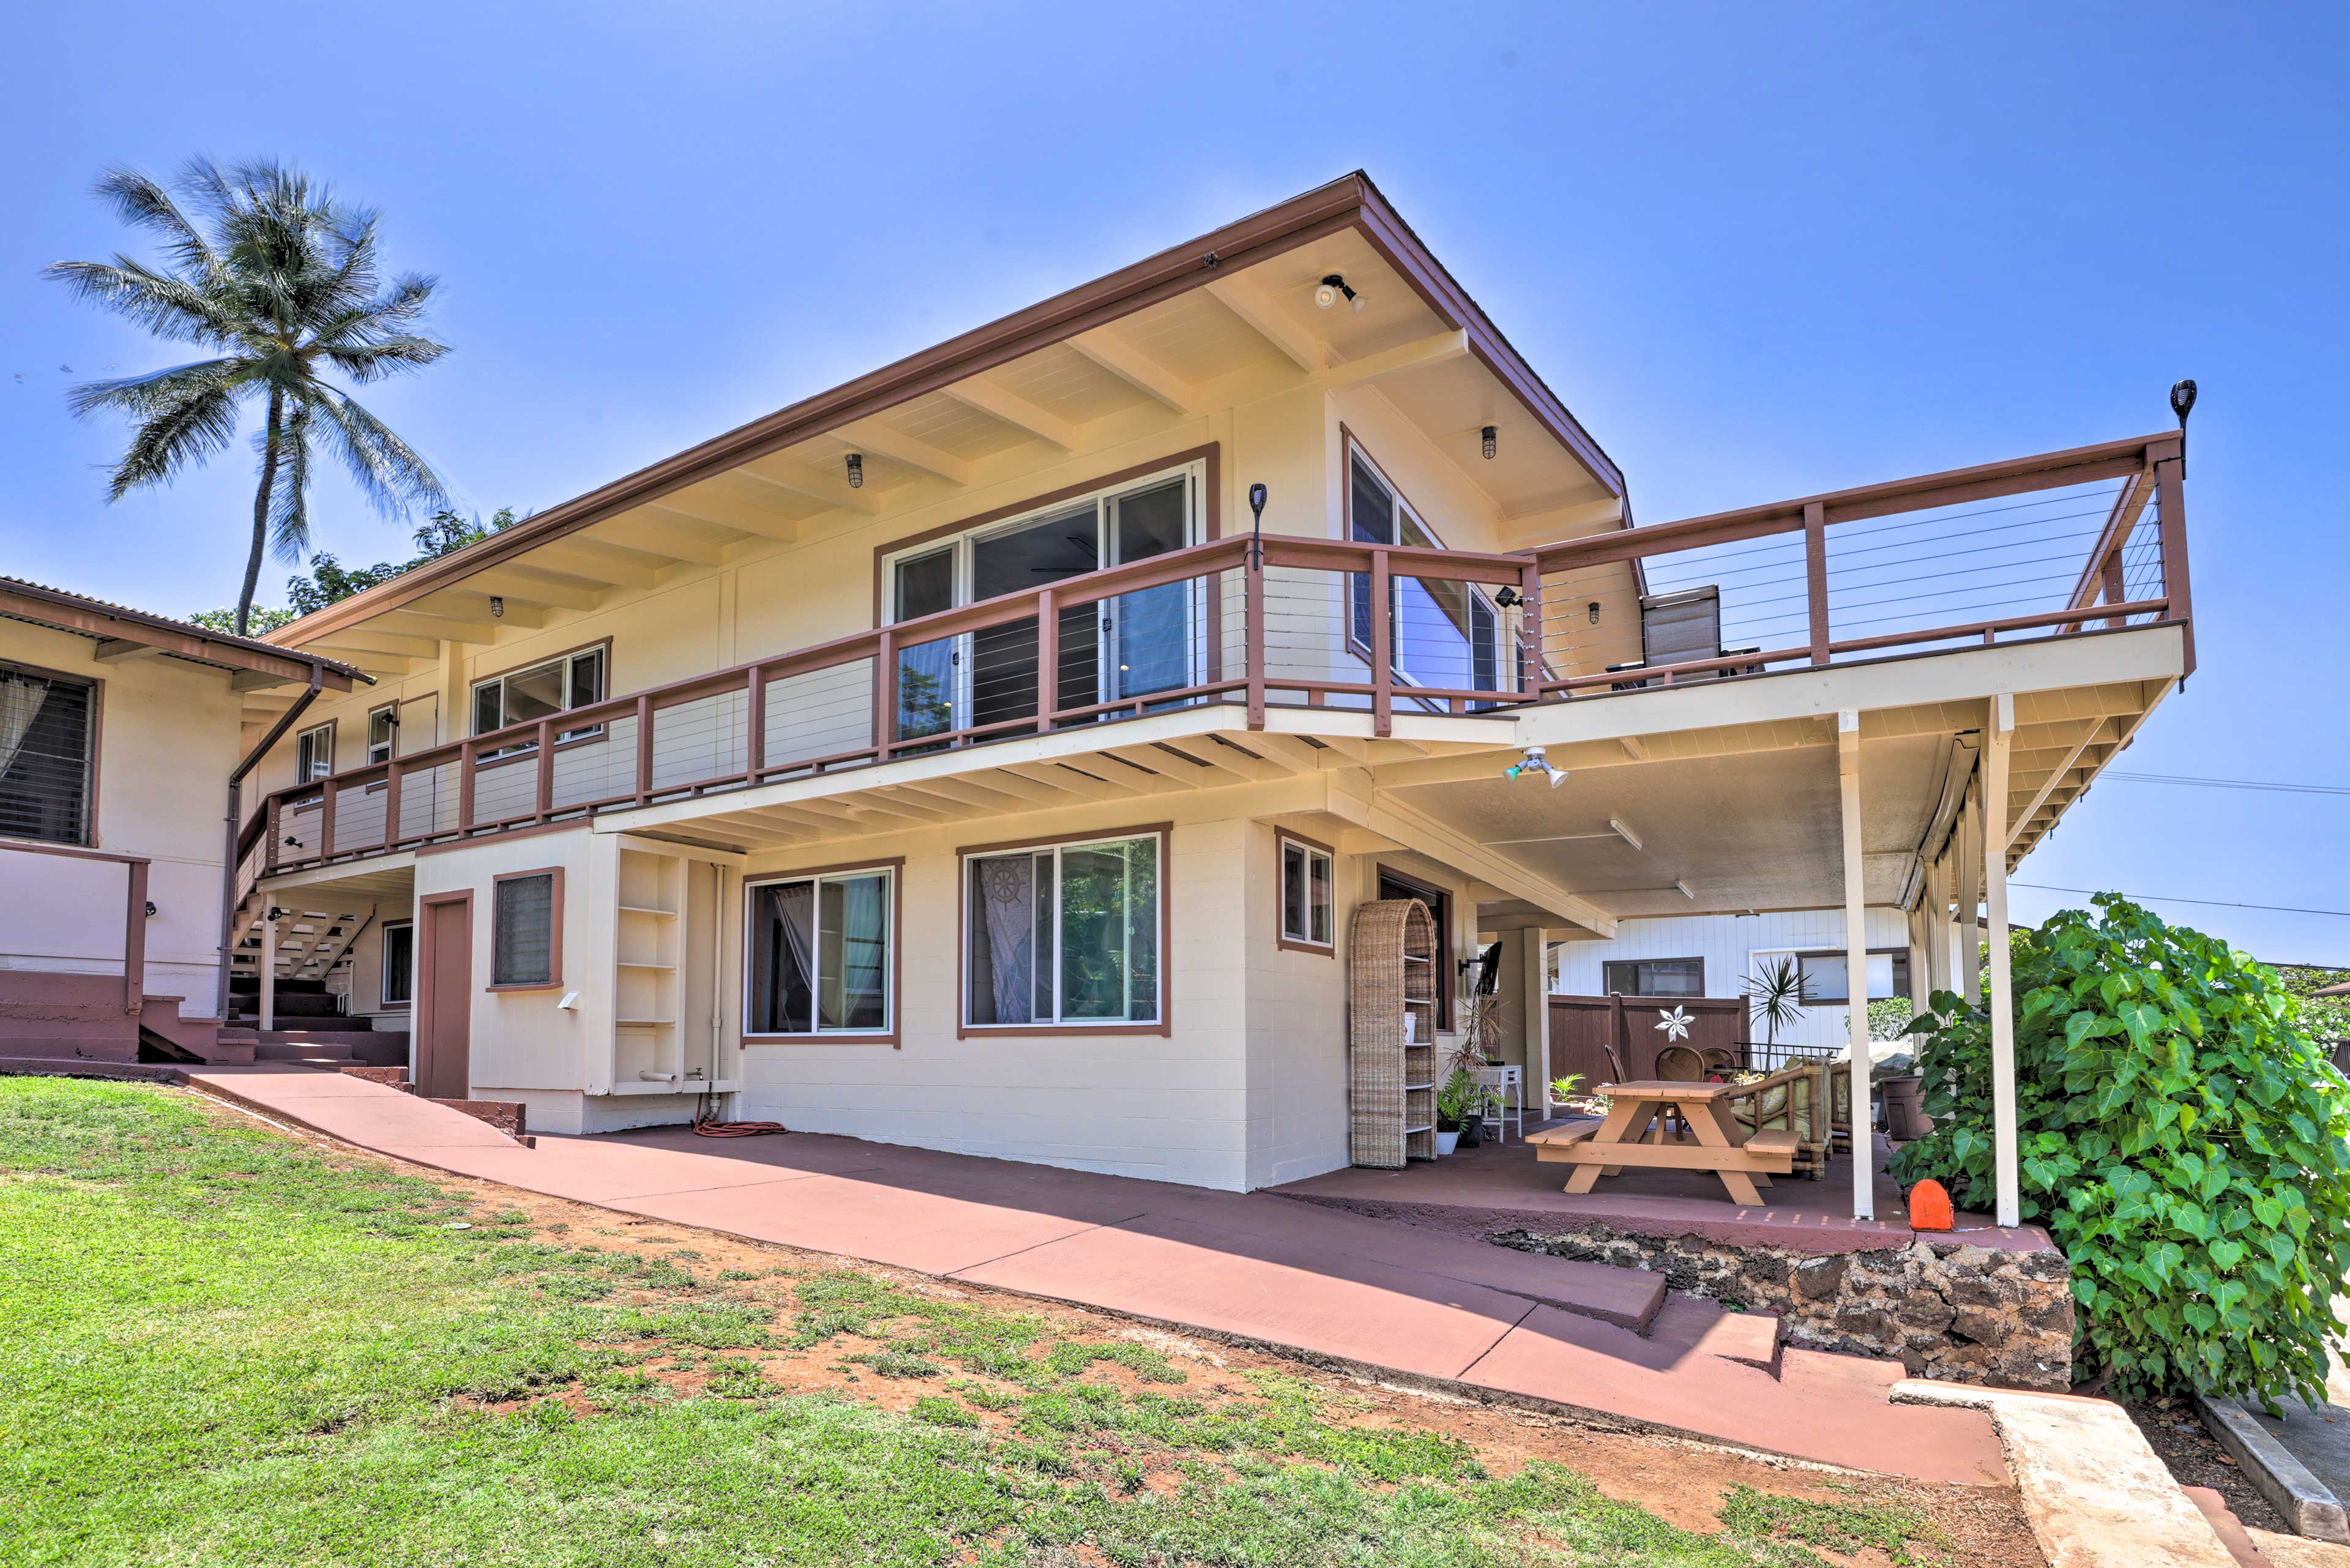 Property Image 2 - Updated Poipu Home: Large Deck w/ Scenic View